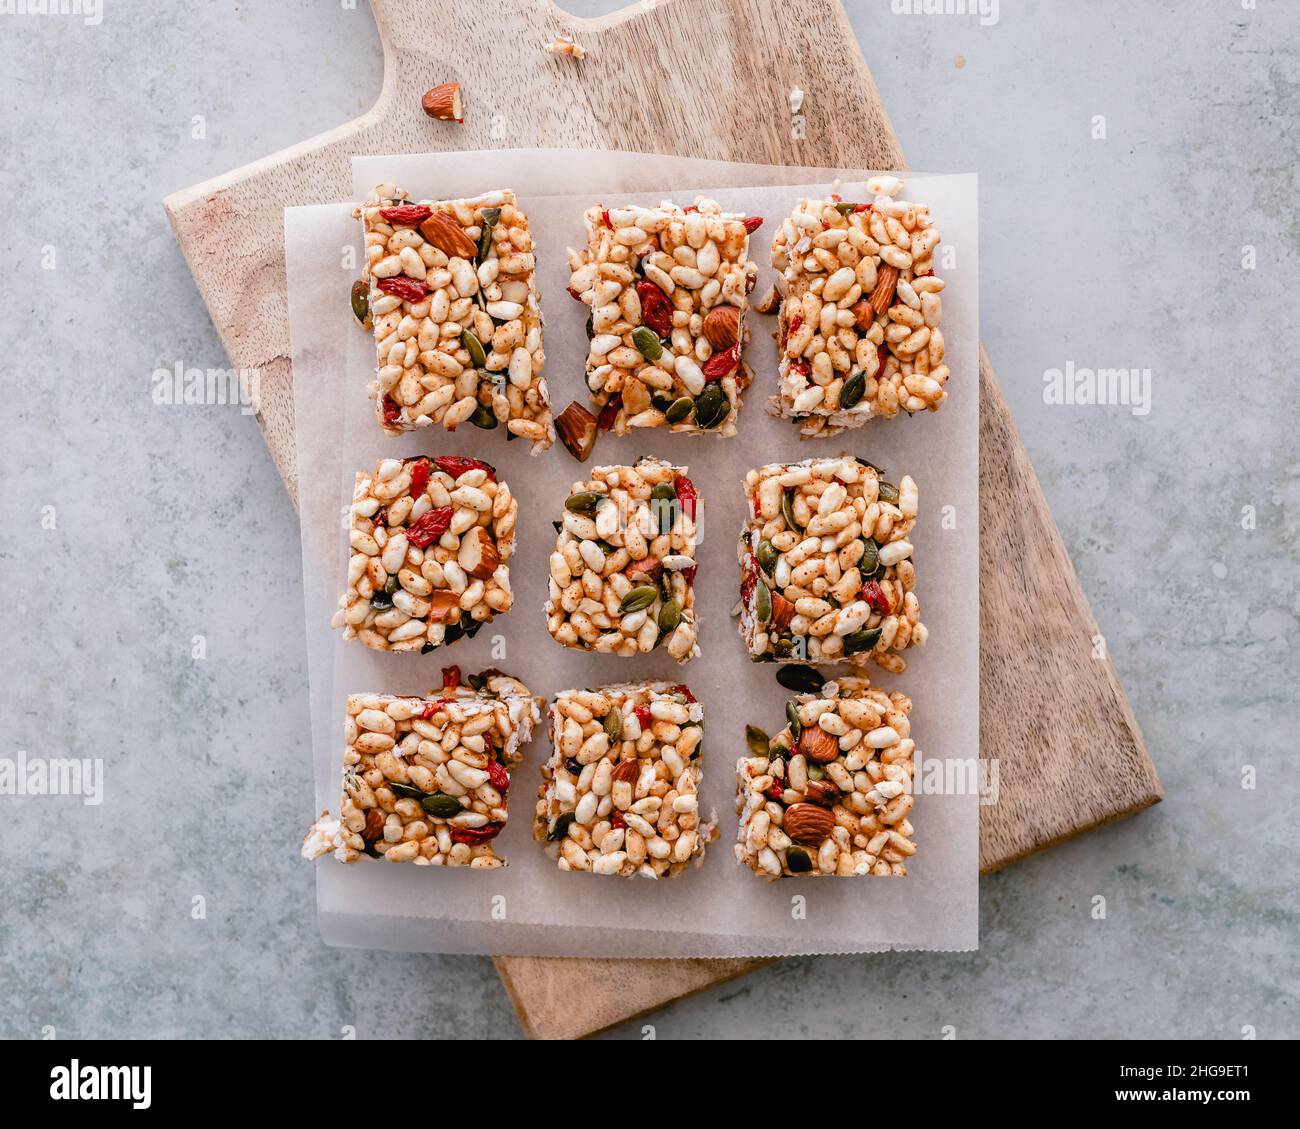 Puffed rice snack bars with goji berries, pumpkin seeds and almonds Stock Photo